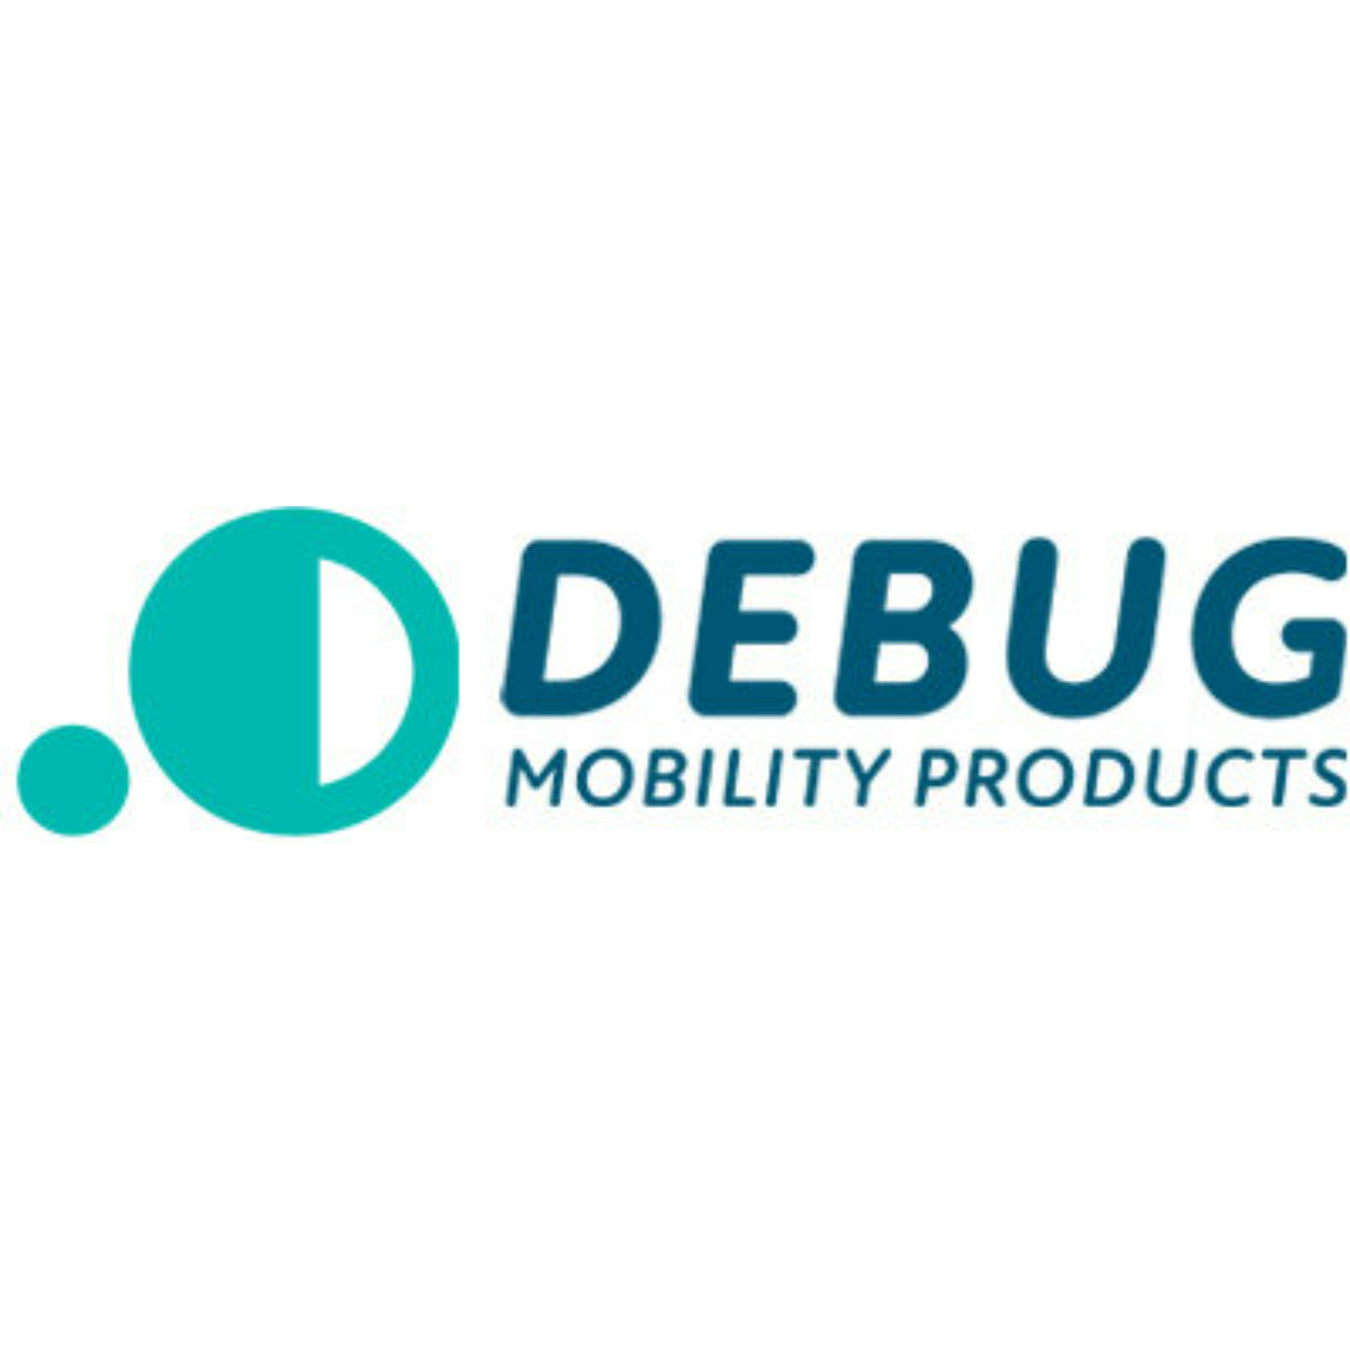 Mobility Products